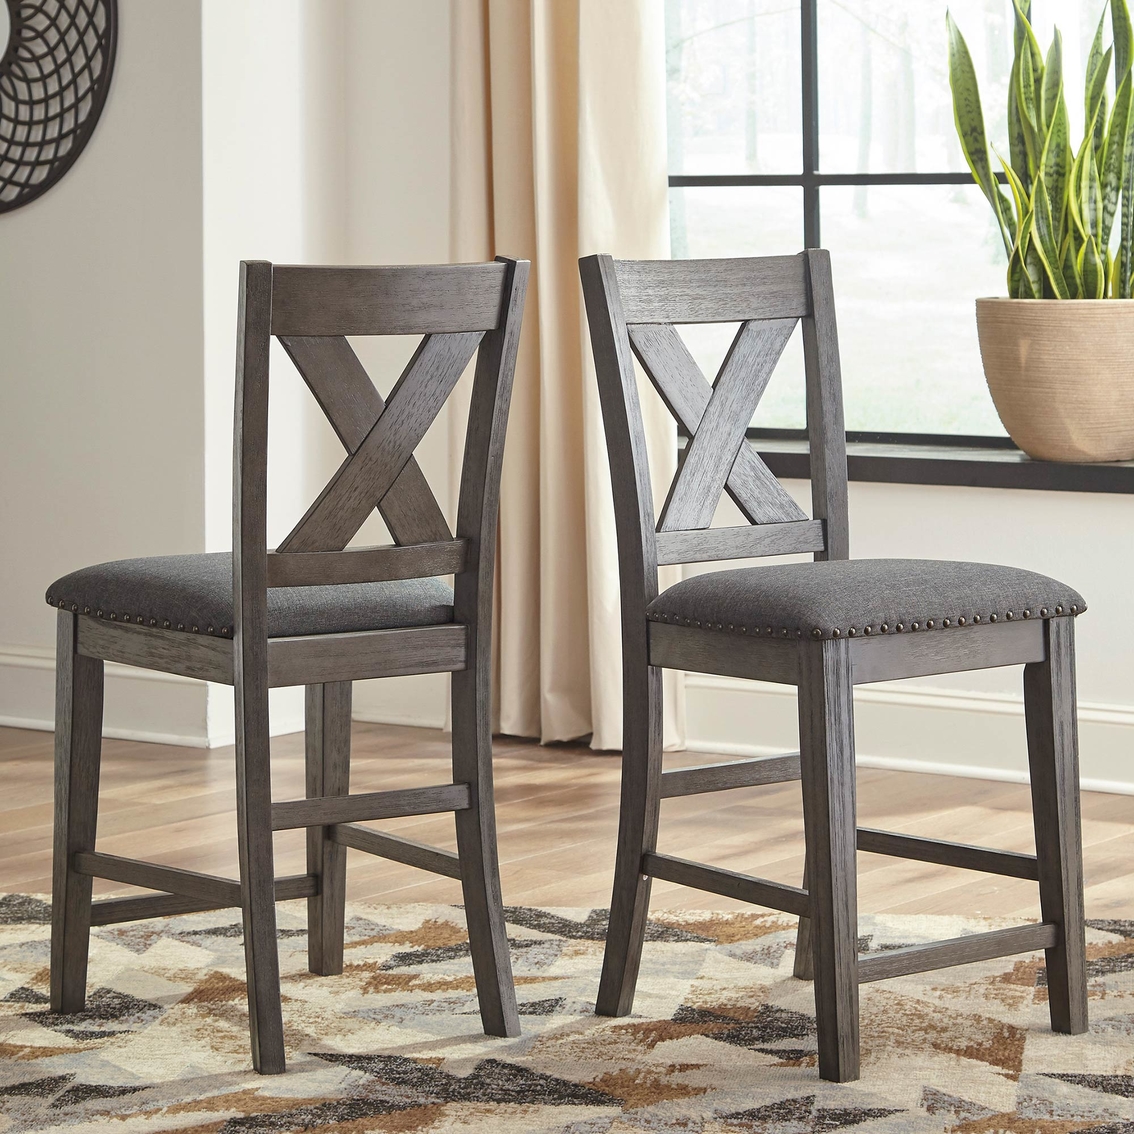 Signature Design by Ashley Caitbrook Counter Table Set with 4 High Back Stools - Image 3 of 4